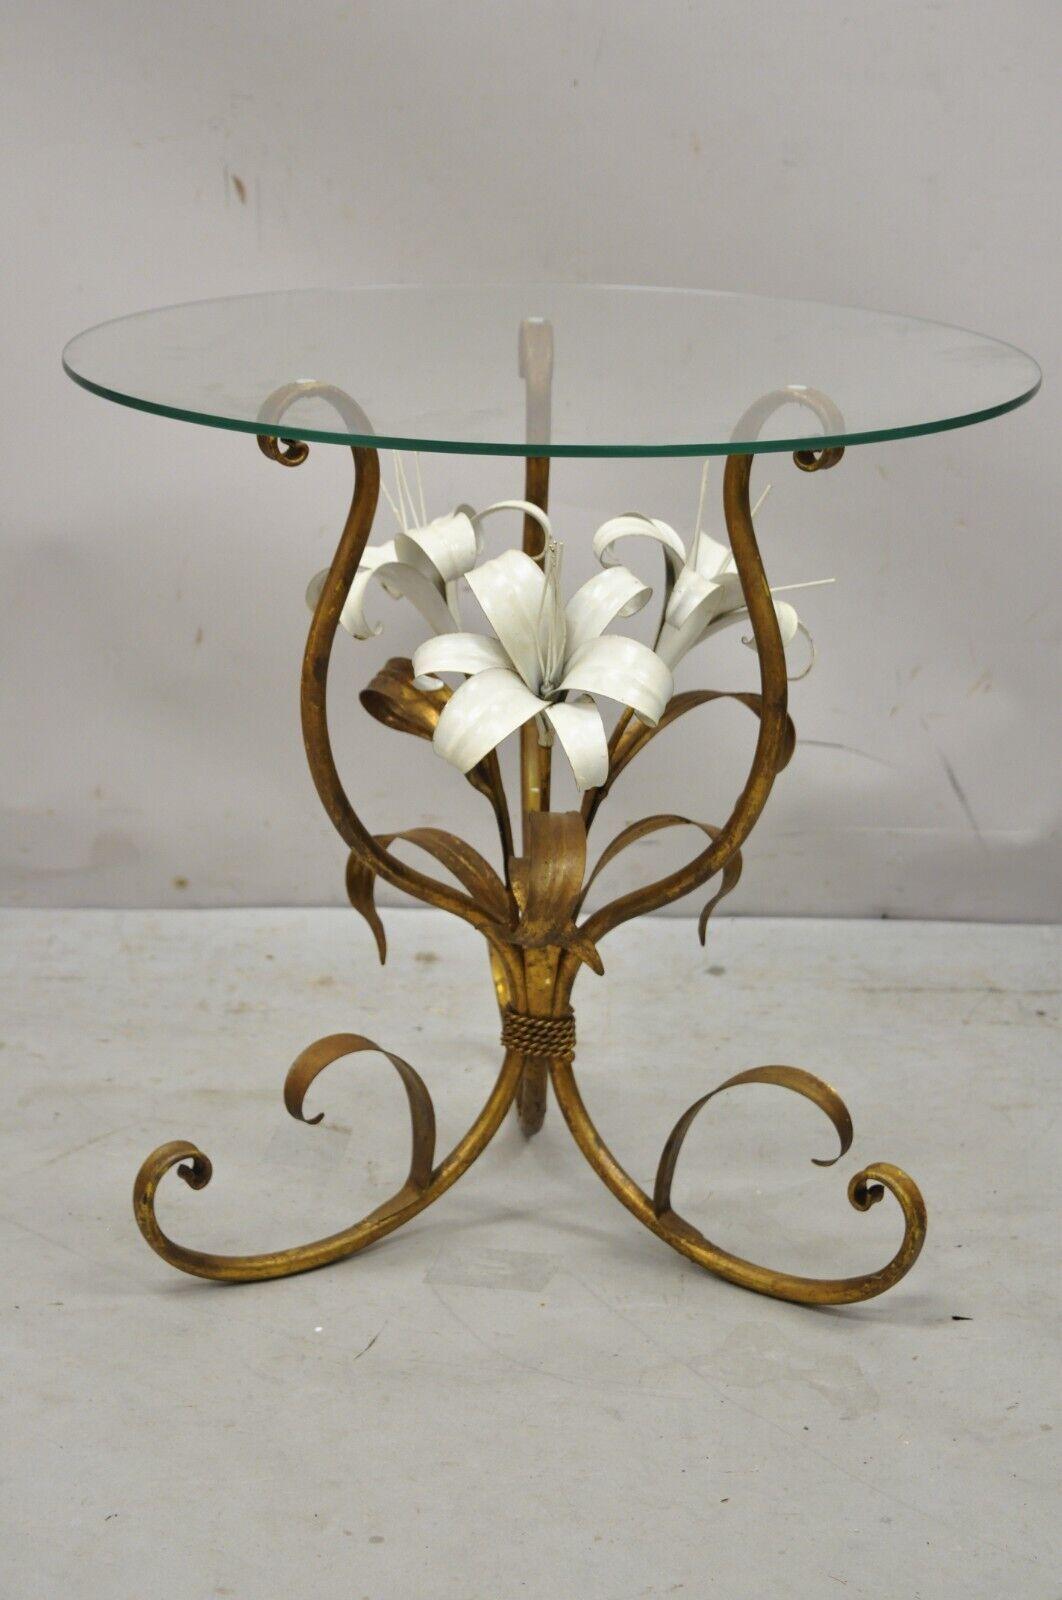 Vintage Italian tole metal gold gilt white flower round glass top side table. Item features a round clear glass top, gold gilt iron base, white flowers, very nice vintage item, great style and form. Circa mid-20th century. Measurements: 20.25